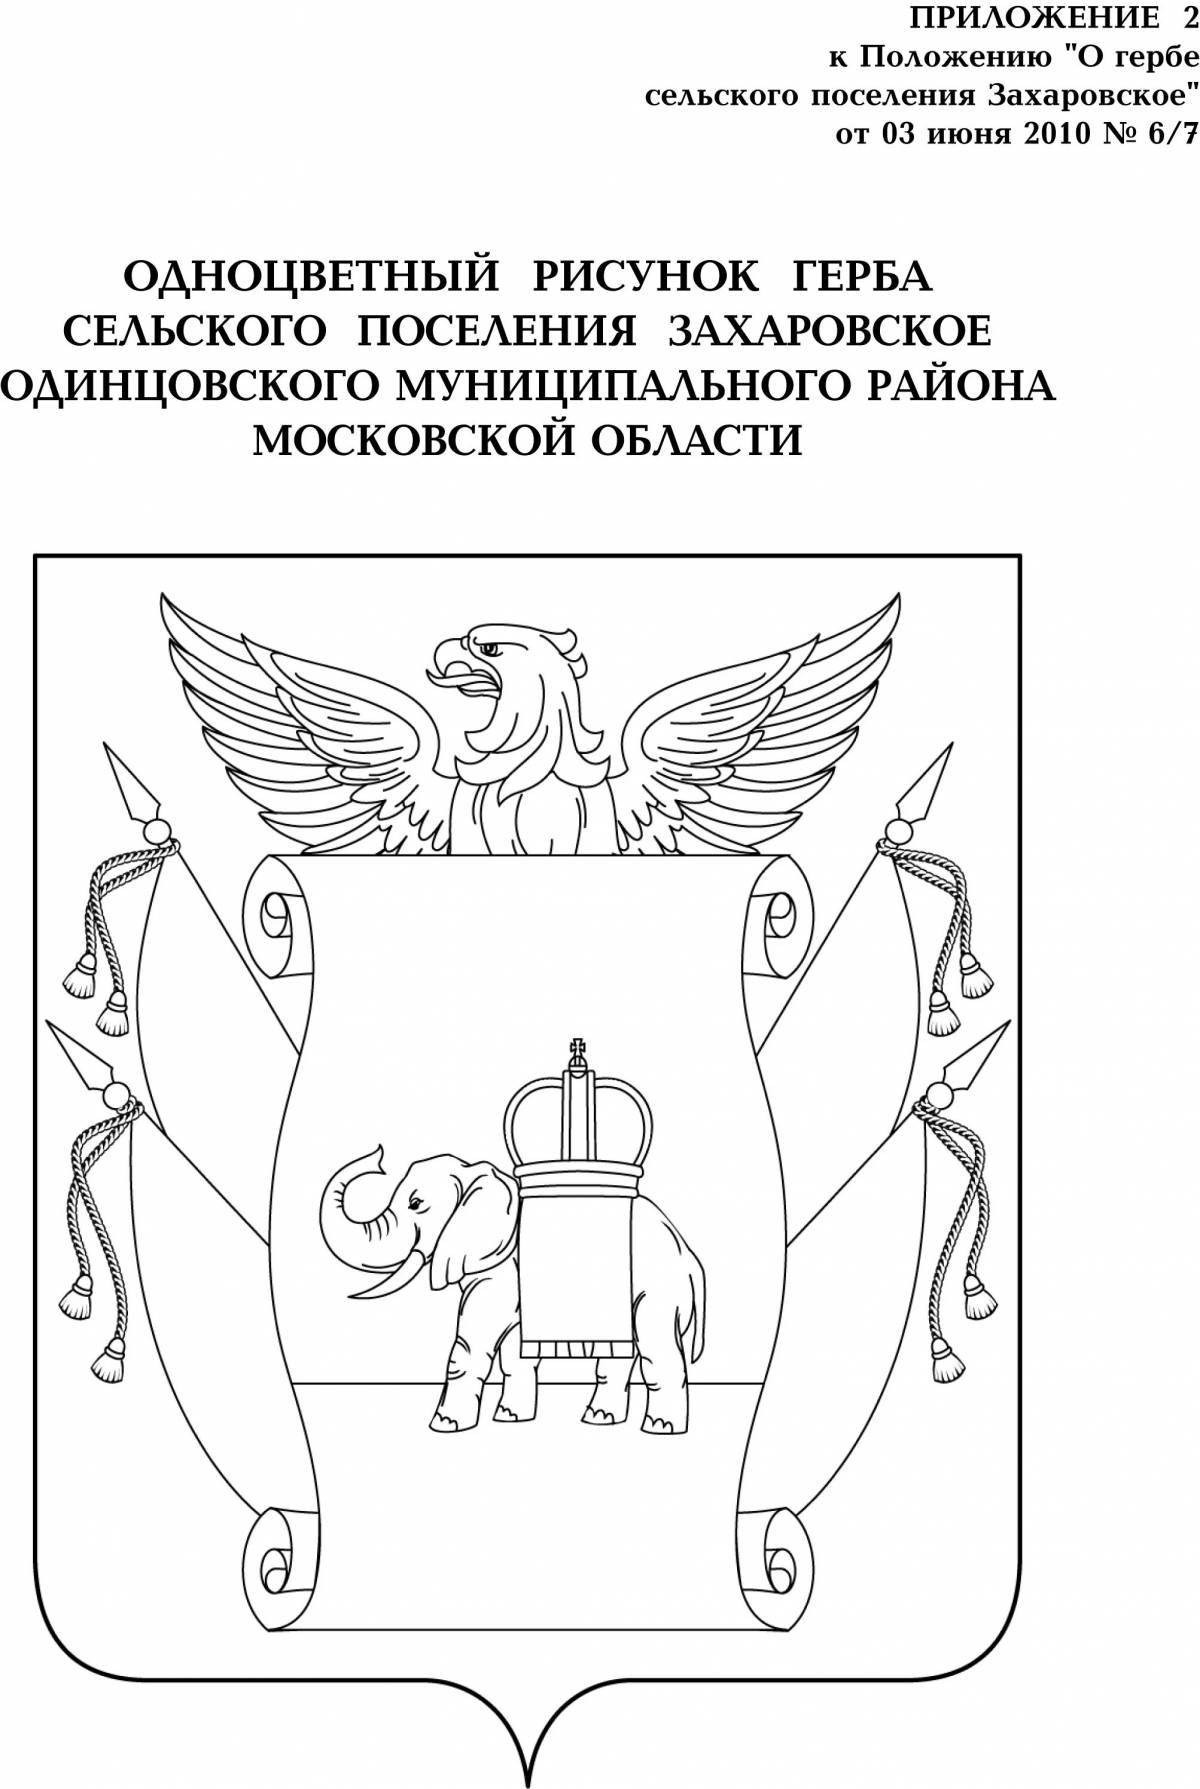 Attractive coat of arms of Odintsovo for preschoolers